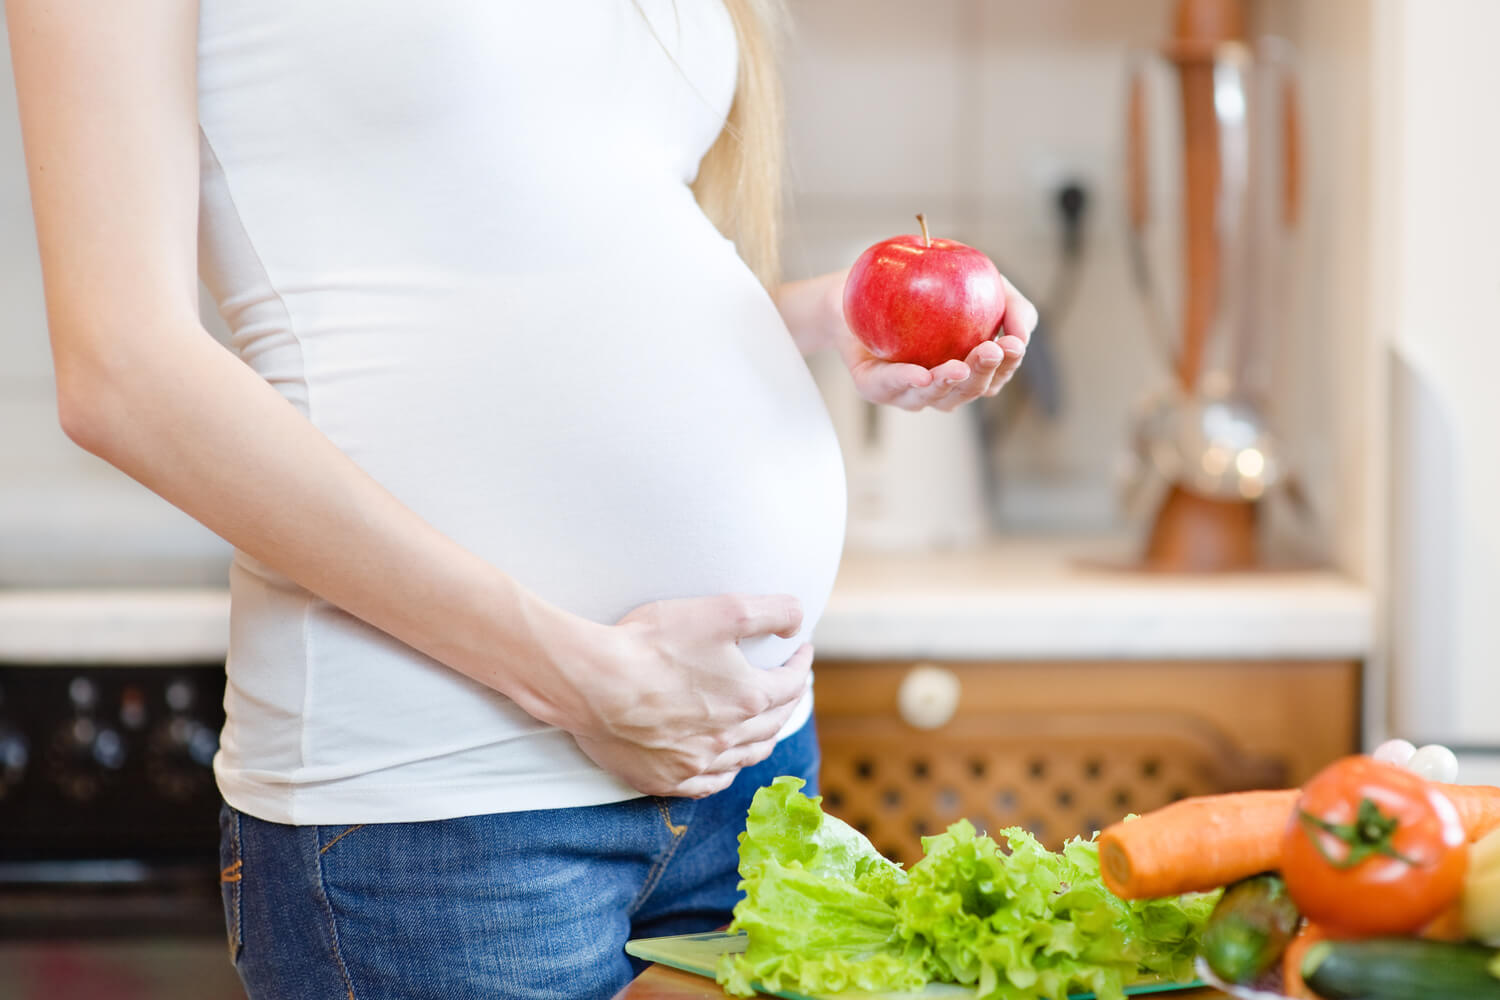 Benefits of Apples During Pregnancy